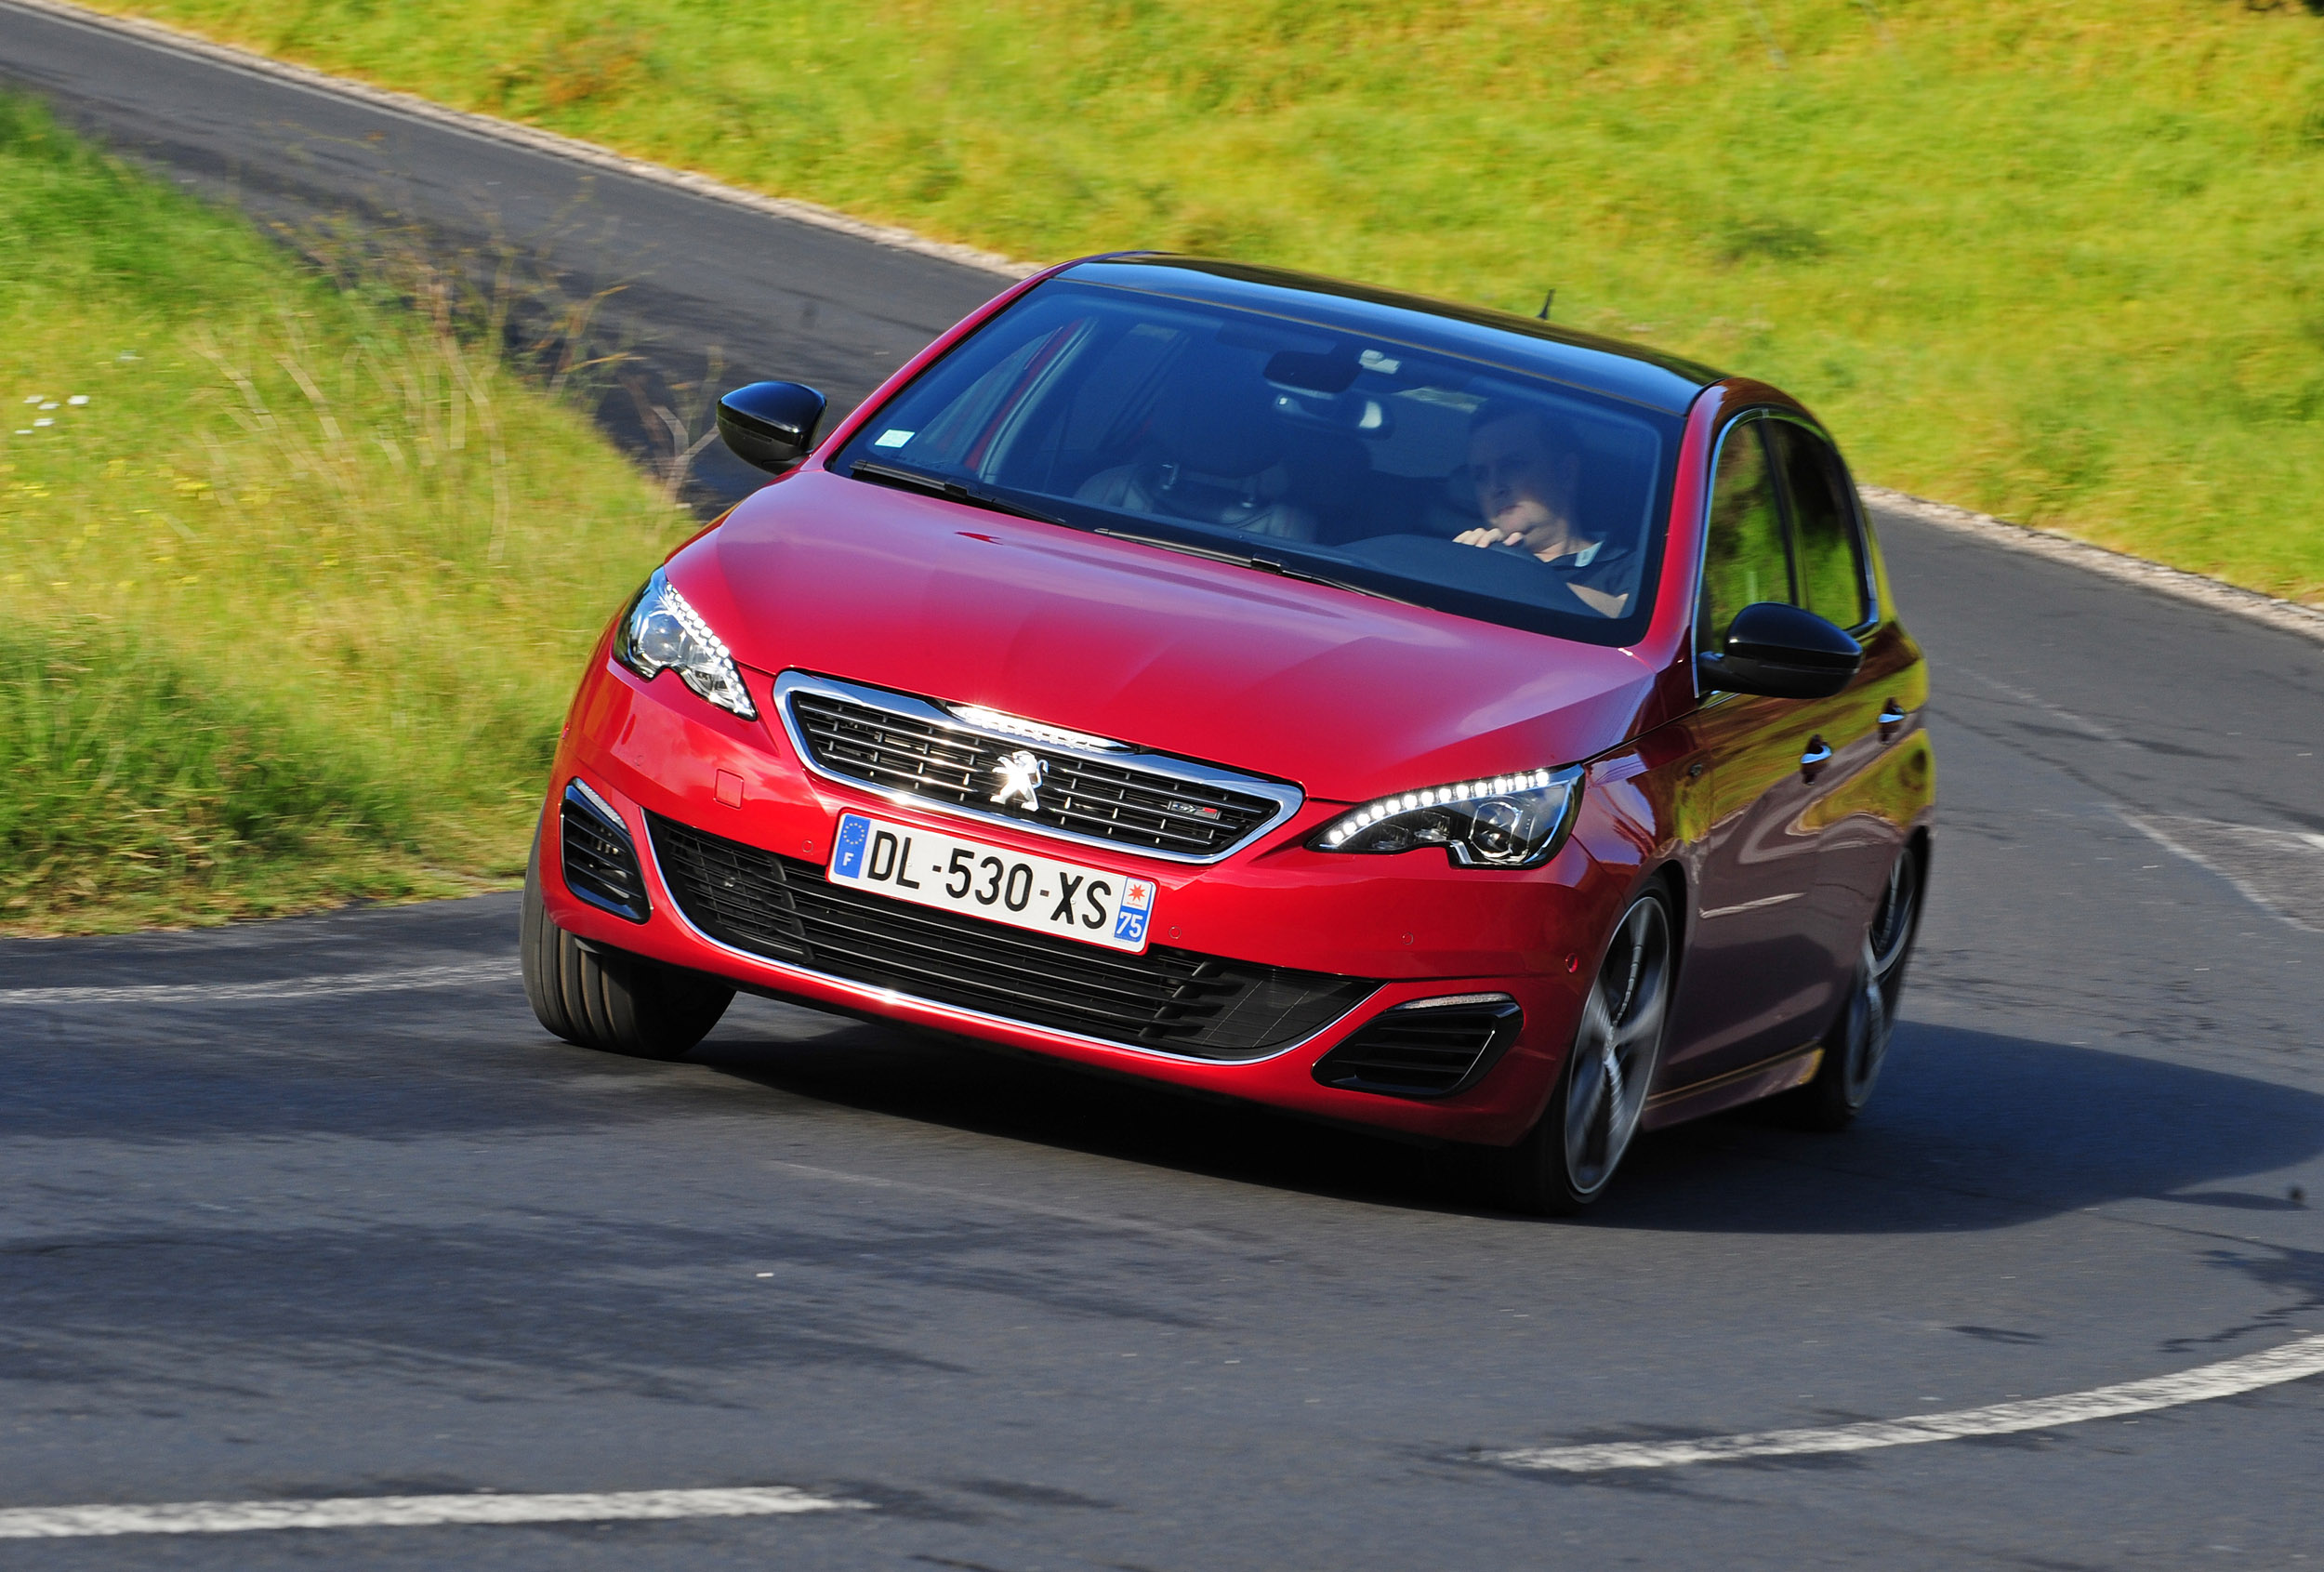 Review of the Peugeot 308